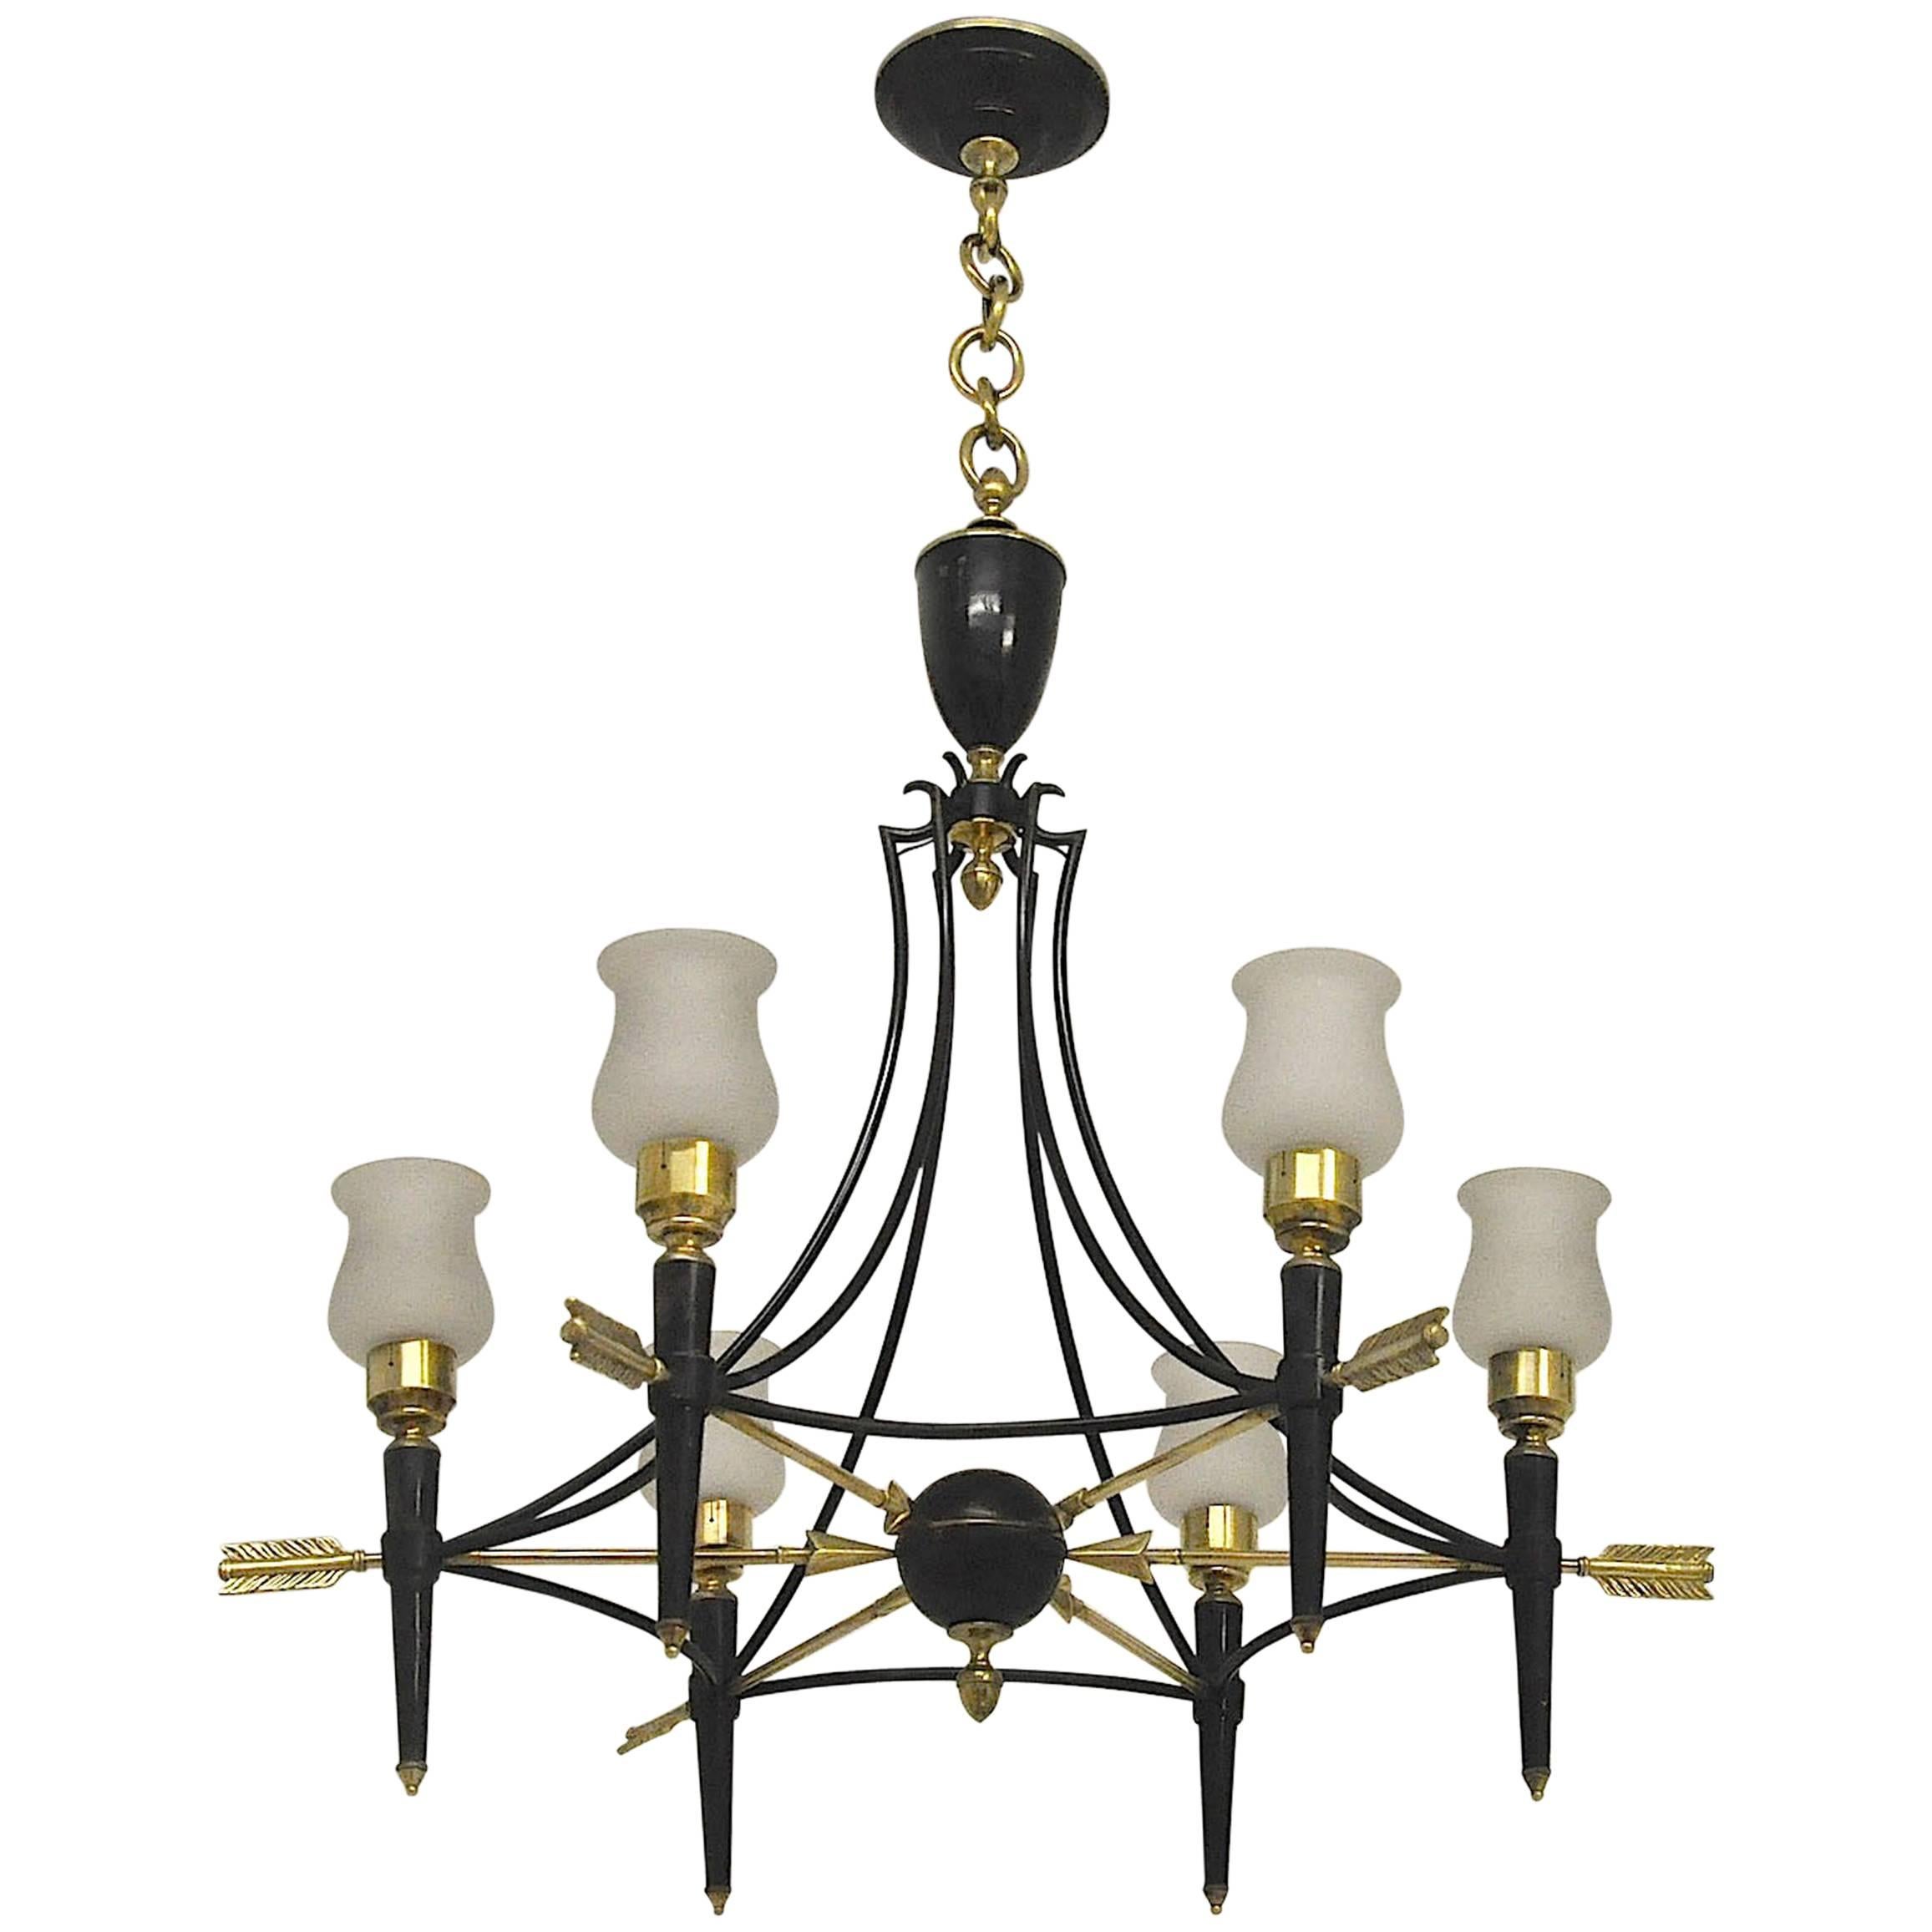 Neoclassical French 1940 Empire Style Chandelier by Maison Jansen